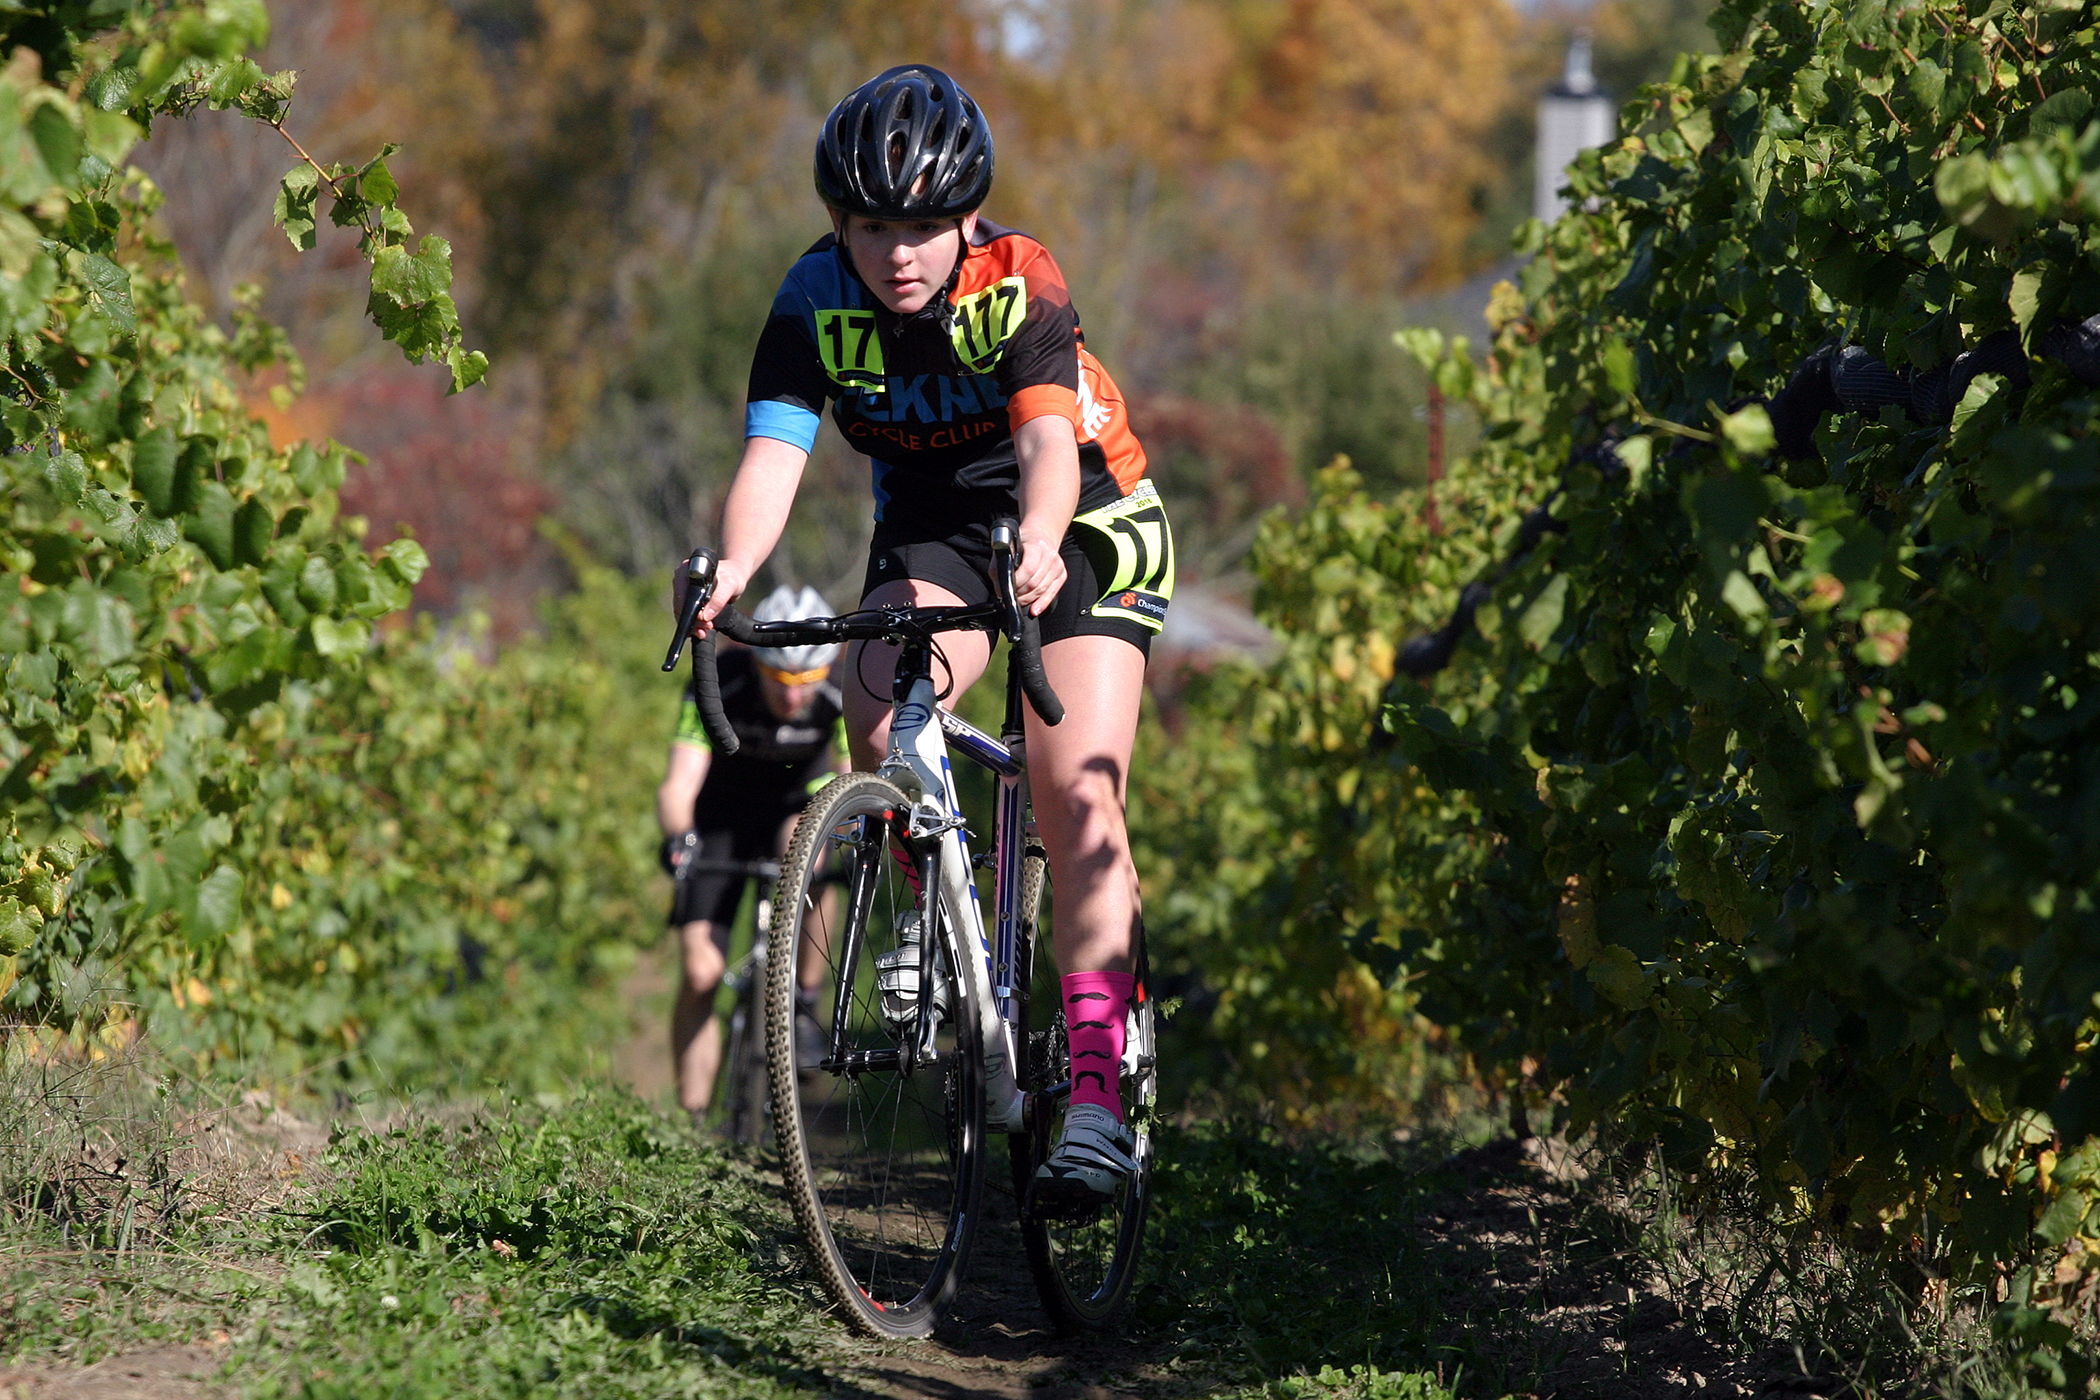 Ottawa's Sara-Ann Kelly competes in last Sunday's cyclocross race held at KIN Vineyard. Photo by Jake Davies